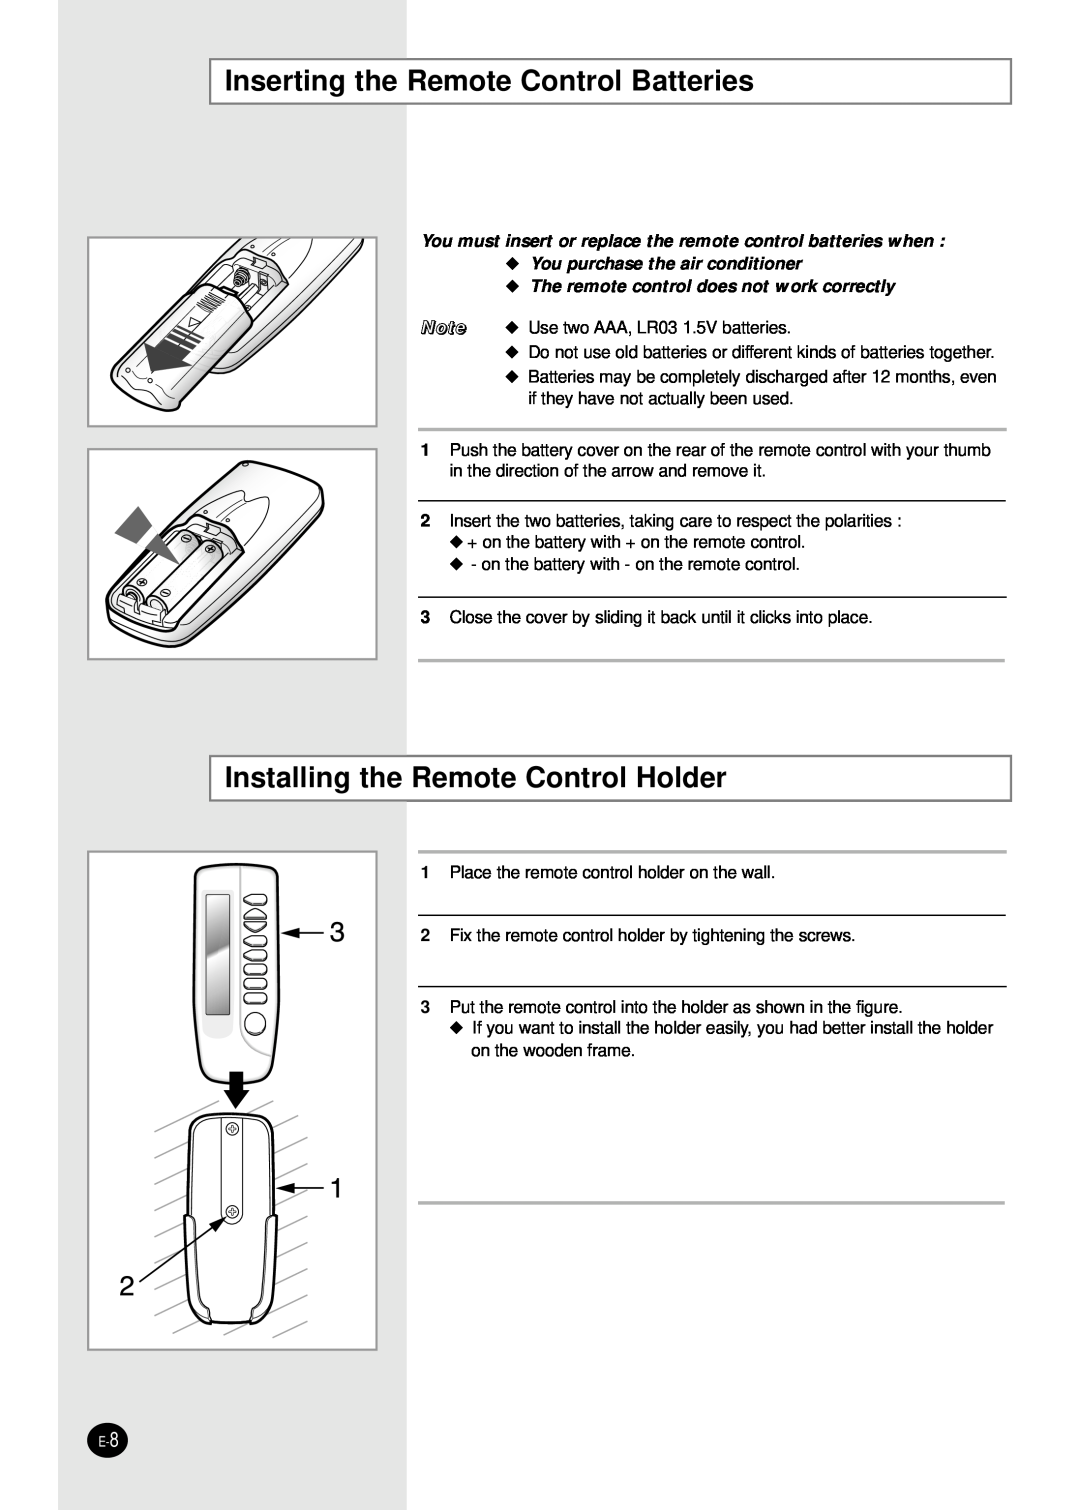 Samsung AQ30C1(2)BC installation manual Inserting the Remote Control Batteries, Installing the Remote Control Holder 